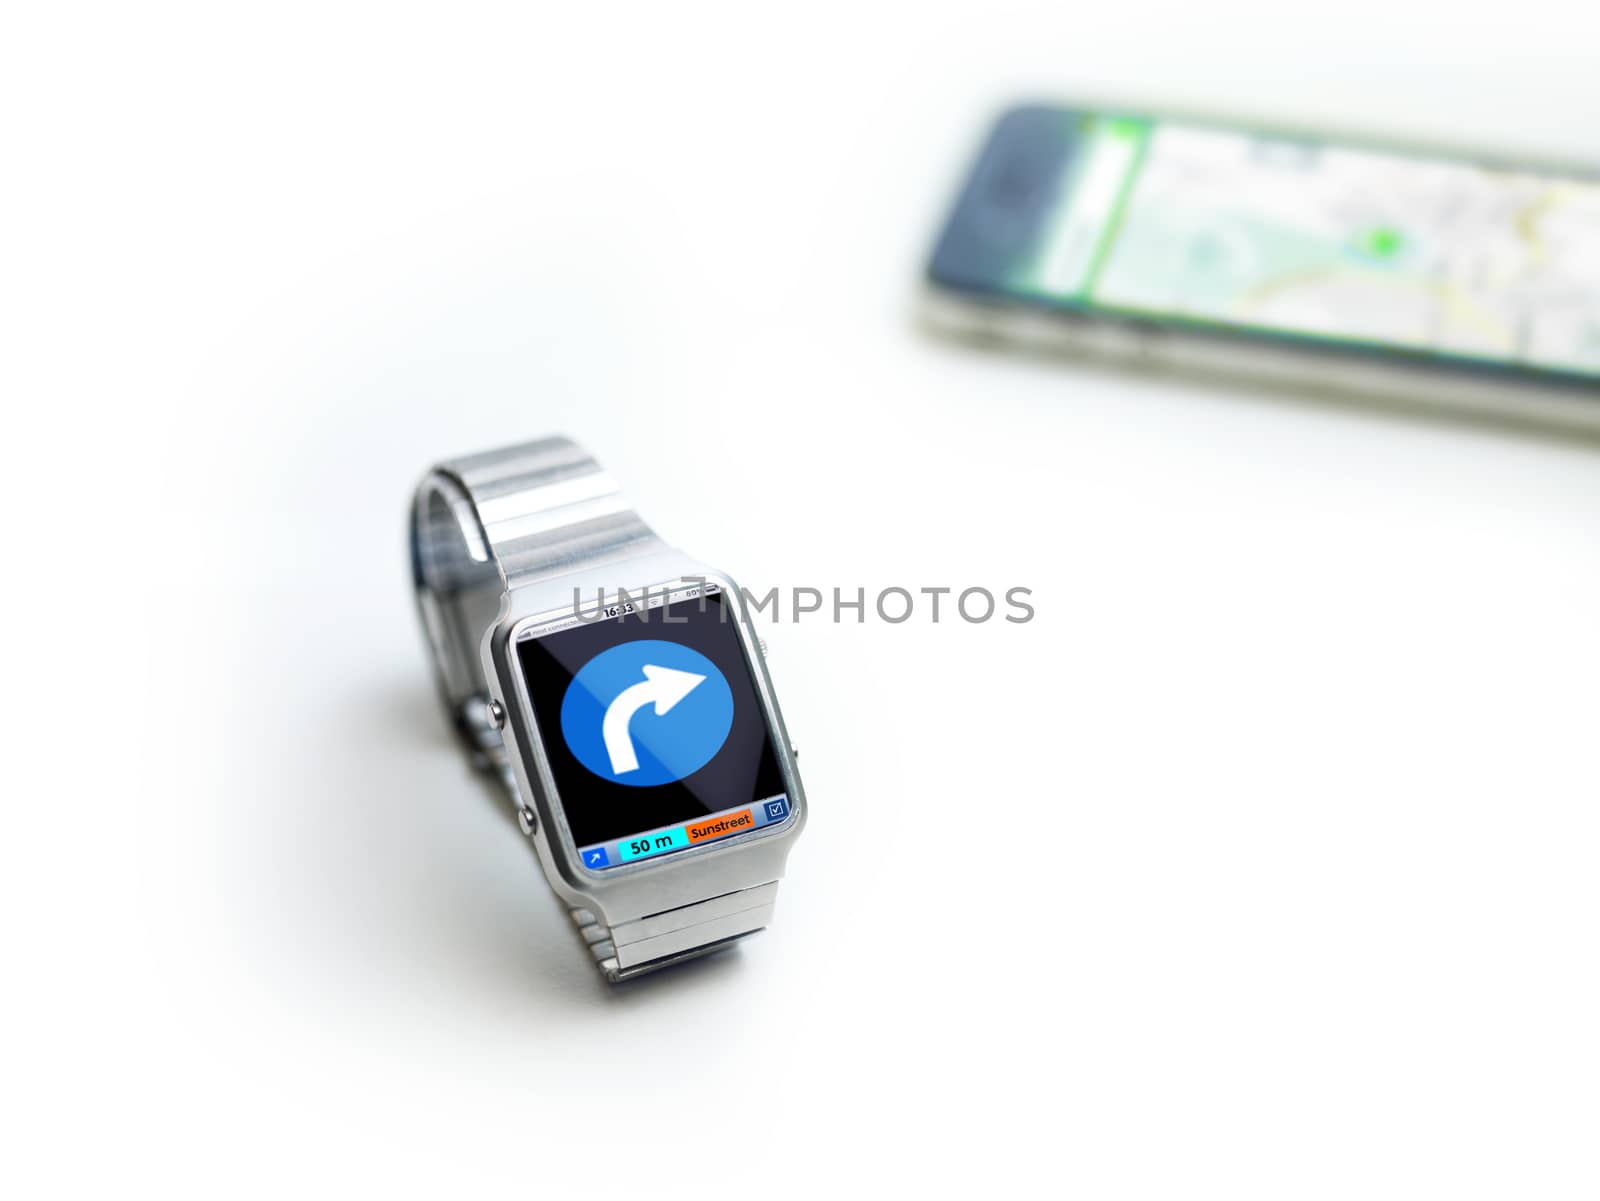 concept of data watch, so called smart watch or iwatch. connects via bluetooth to smartphone